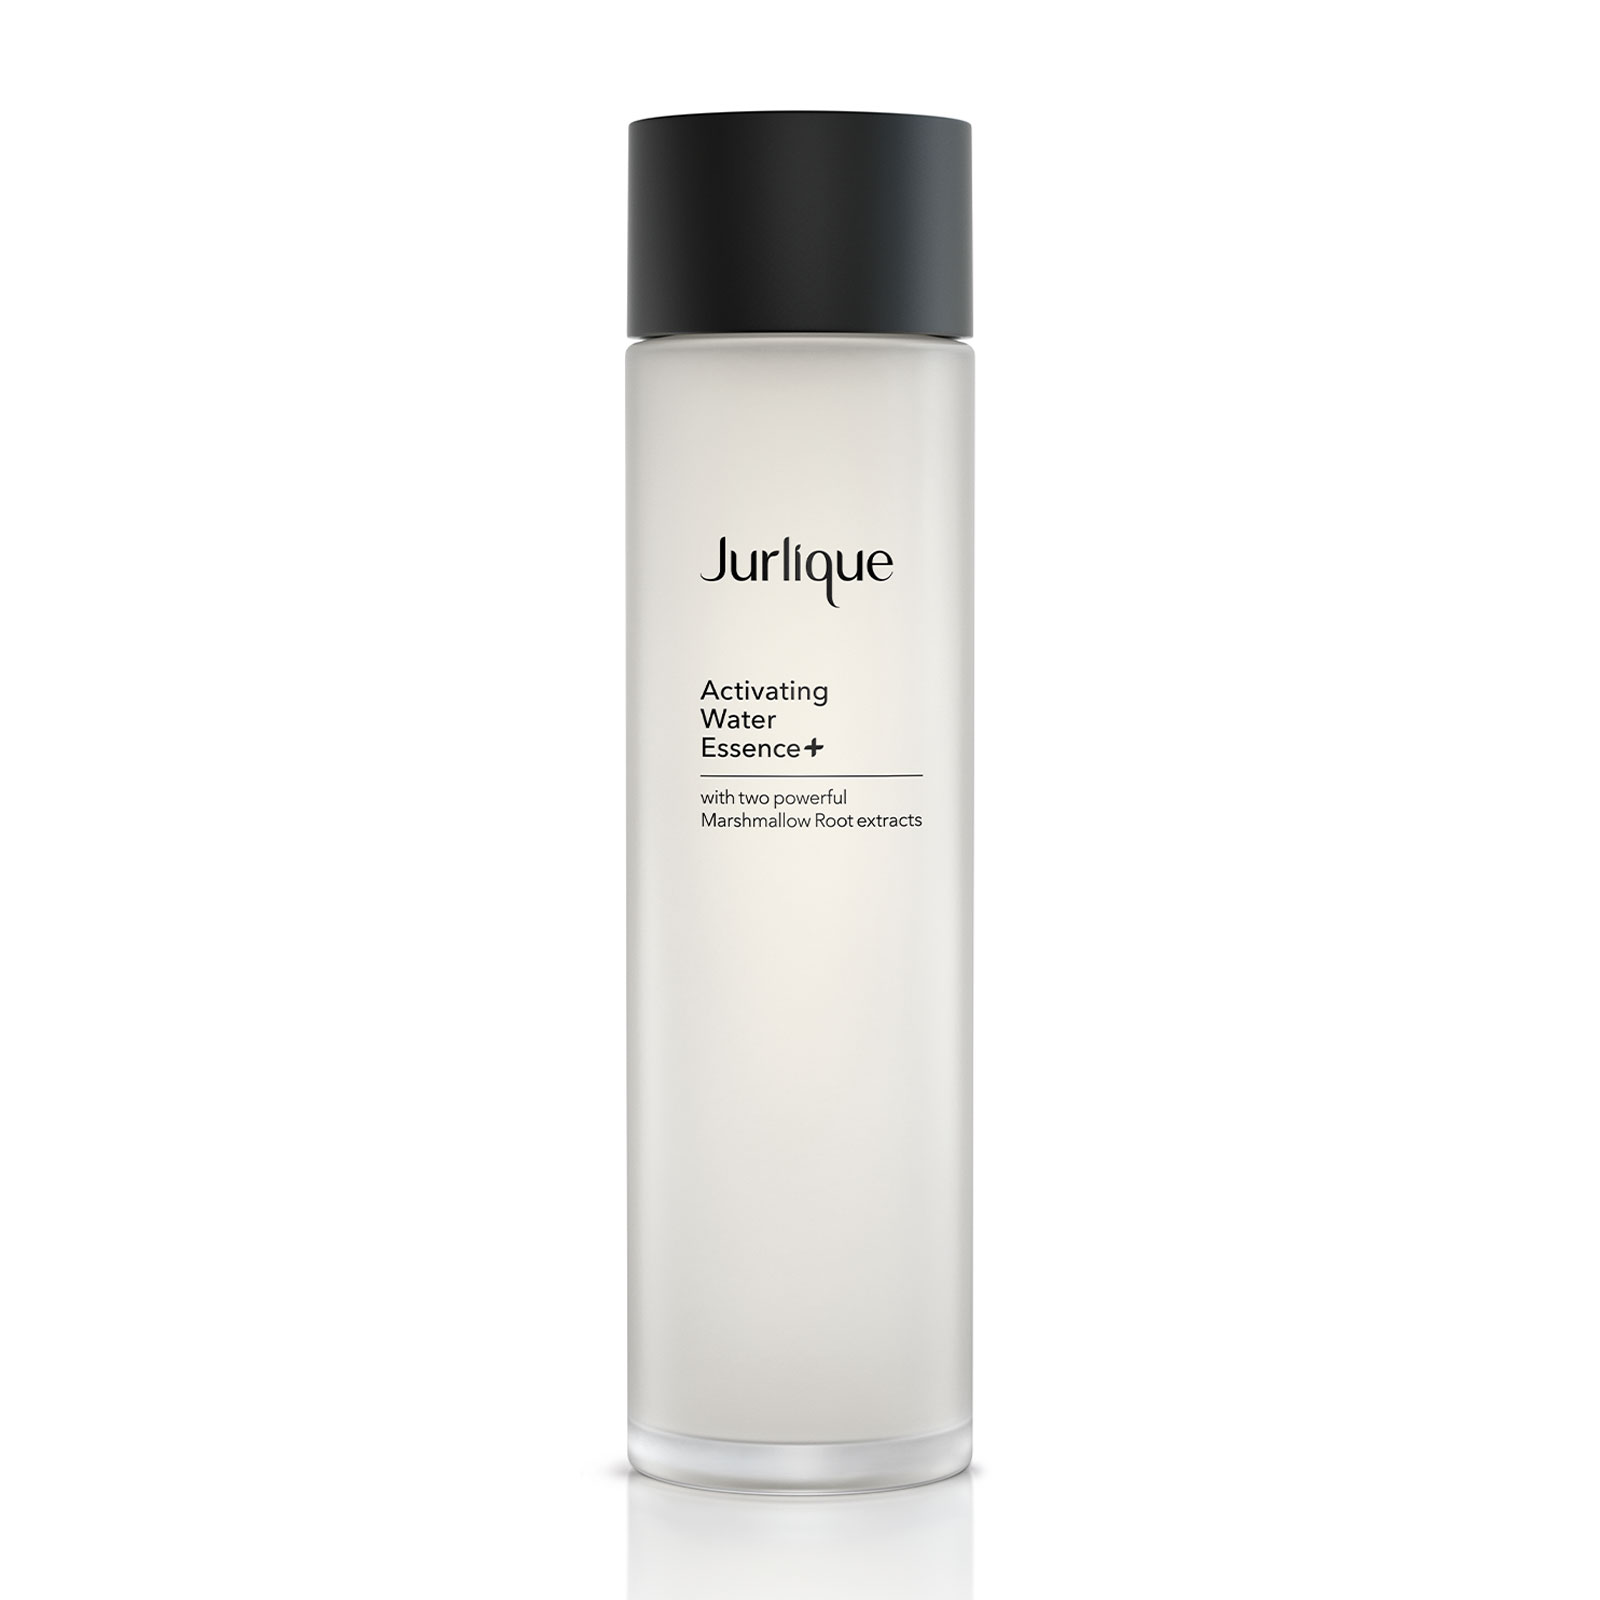 Jurlique Activating Water Essence + Limited Edition 1% for the Planet 150ml